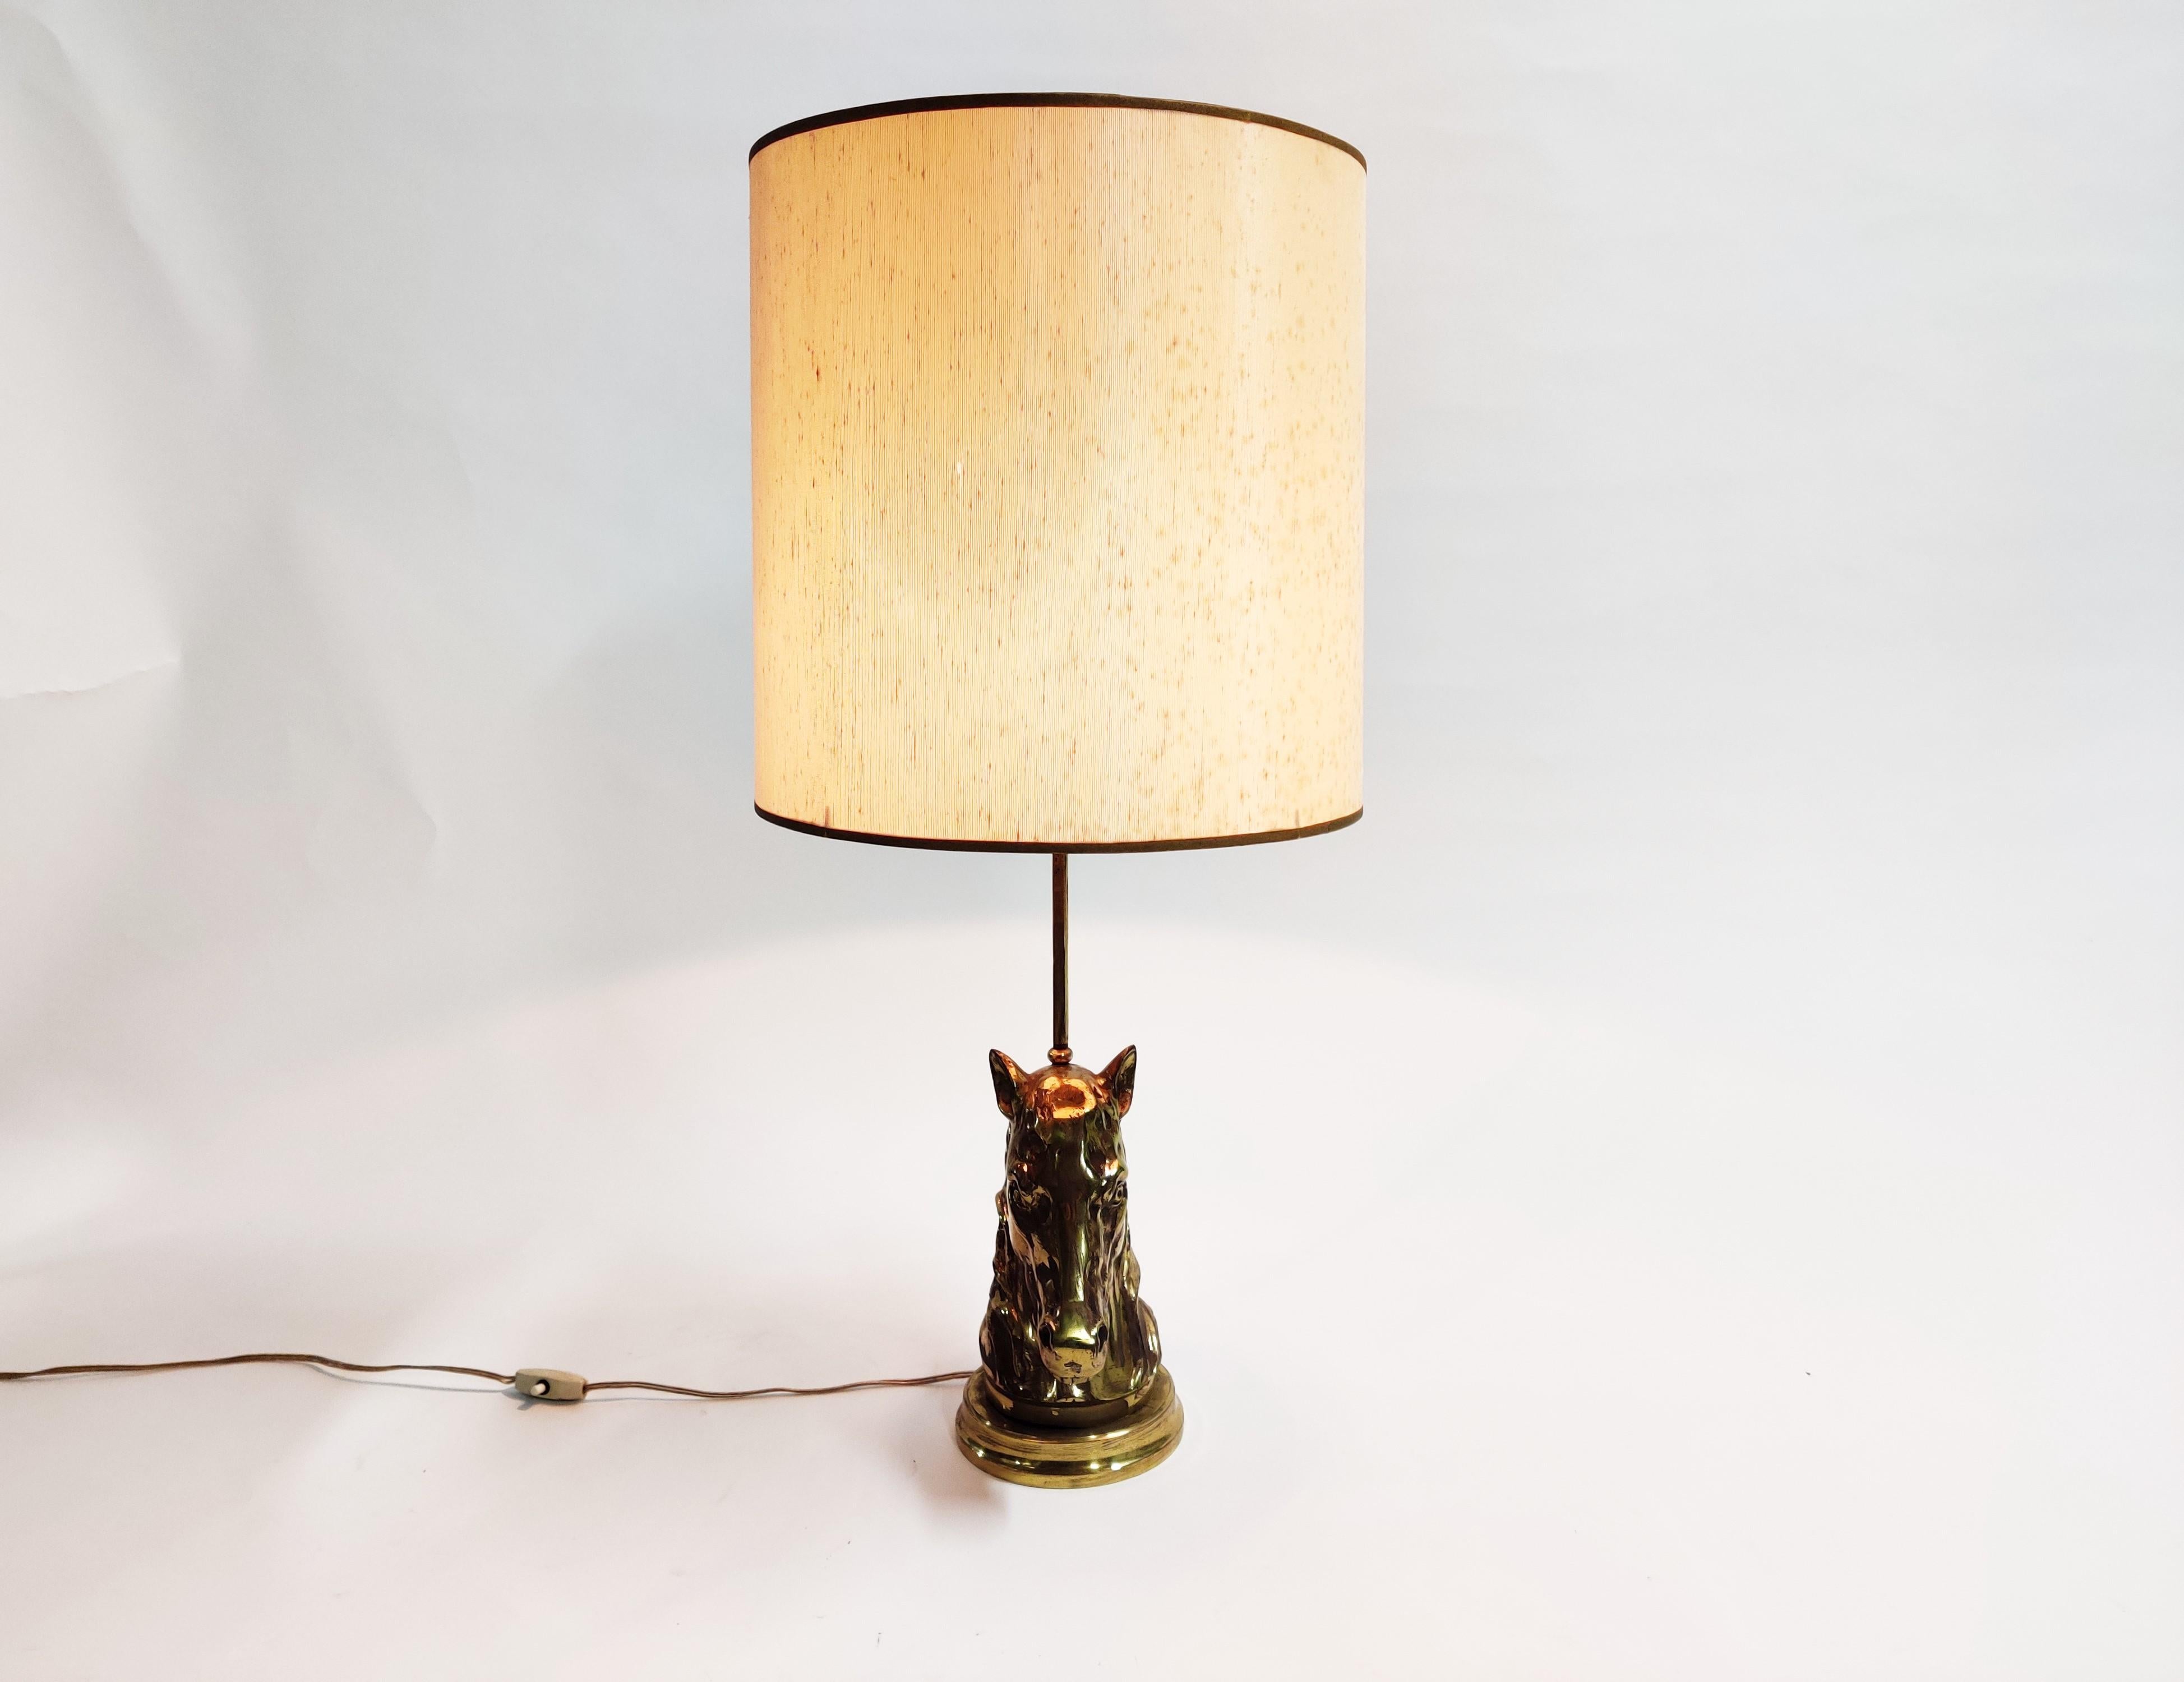 Bronze horse head table lamp in the style of Maison Jansen.

The brass horse head has beautiful details and slight patina. 

Comes with a period lamp shade.

Stylish table lamp with a luxurious appeal.

Tested and ready for use. To be used